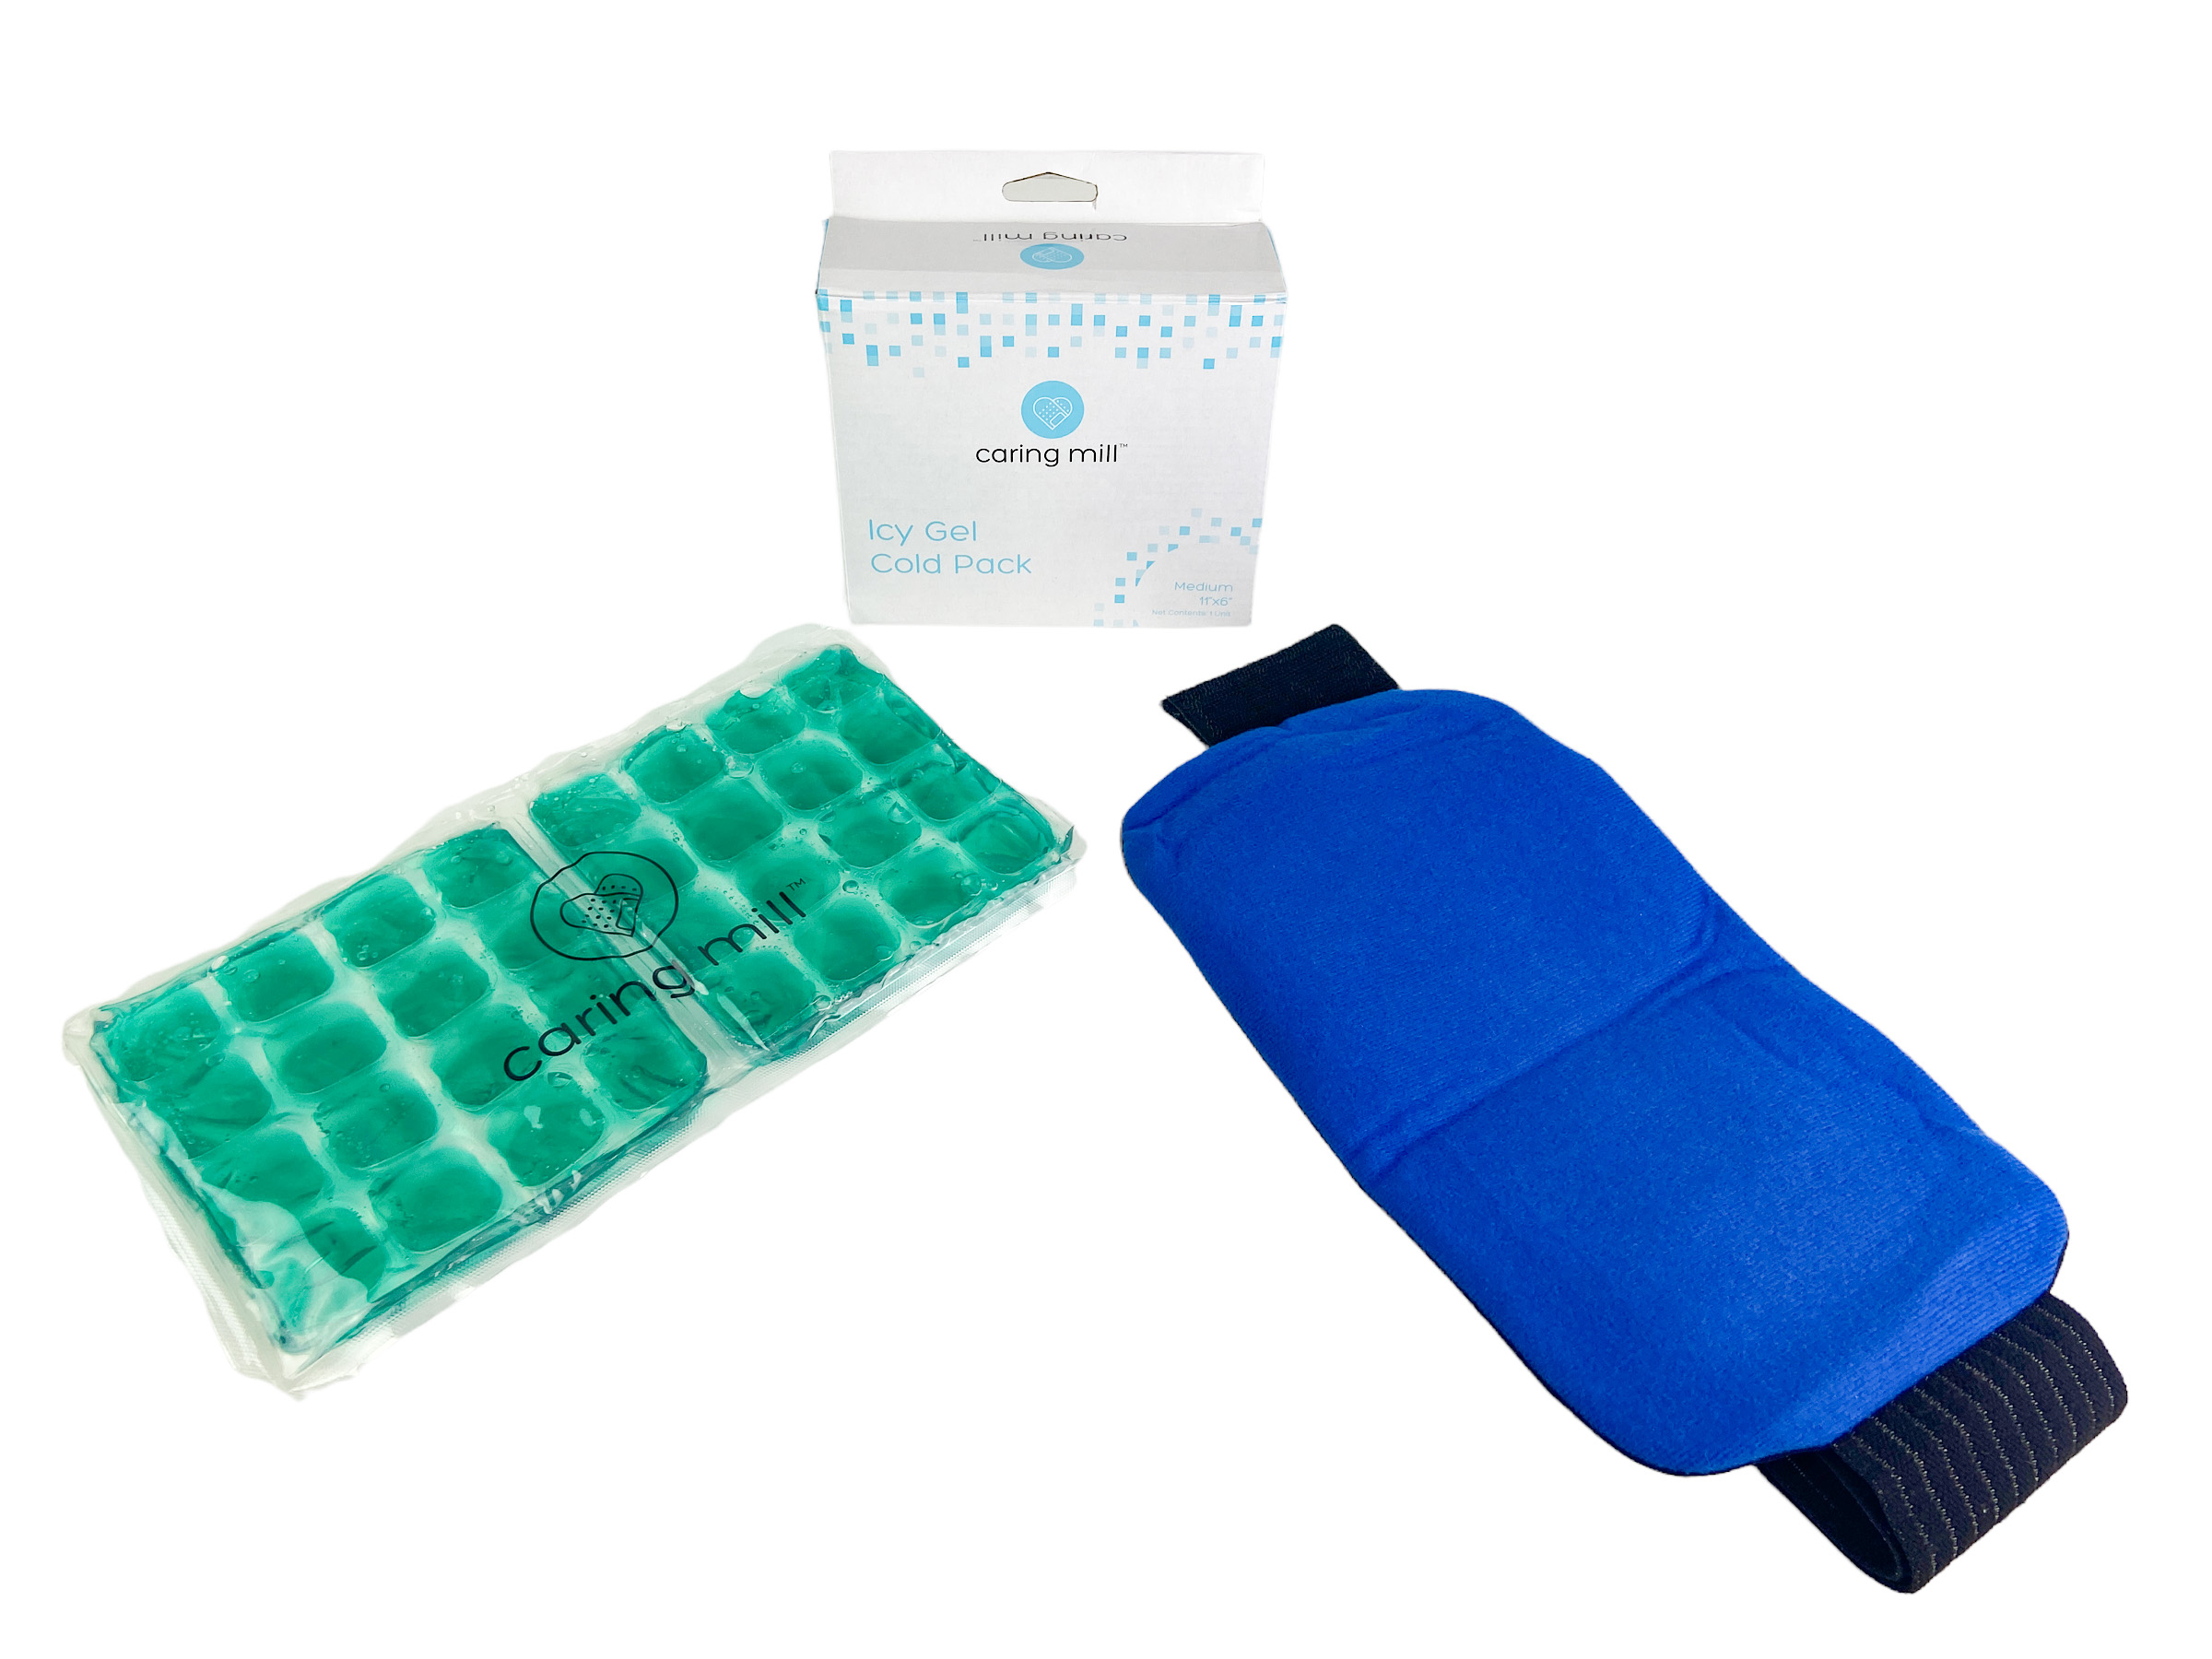 Caring Mill Icy Gel Cold Pack.